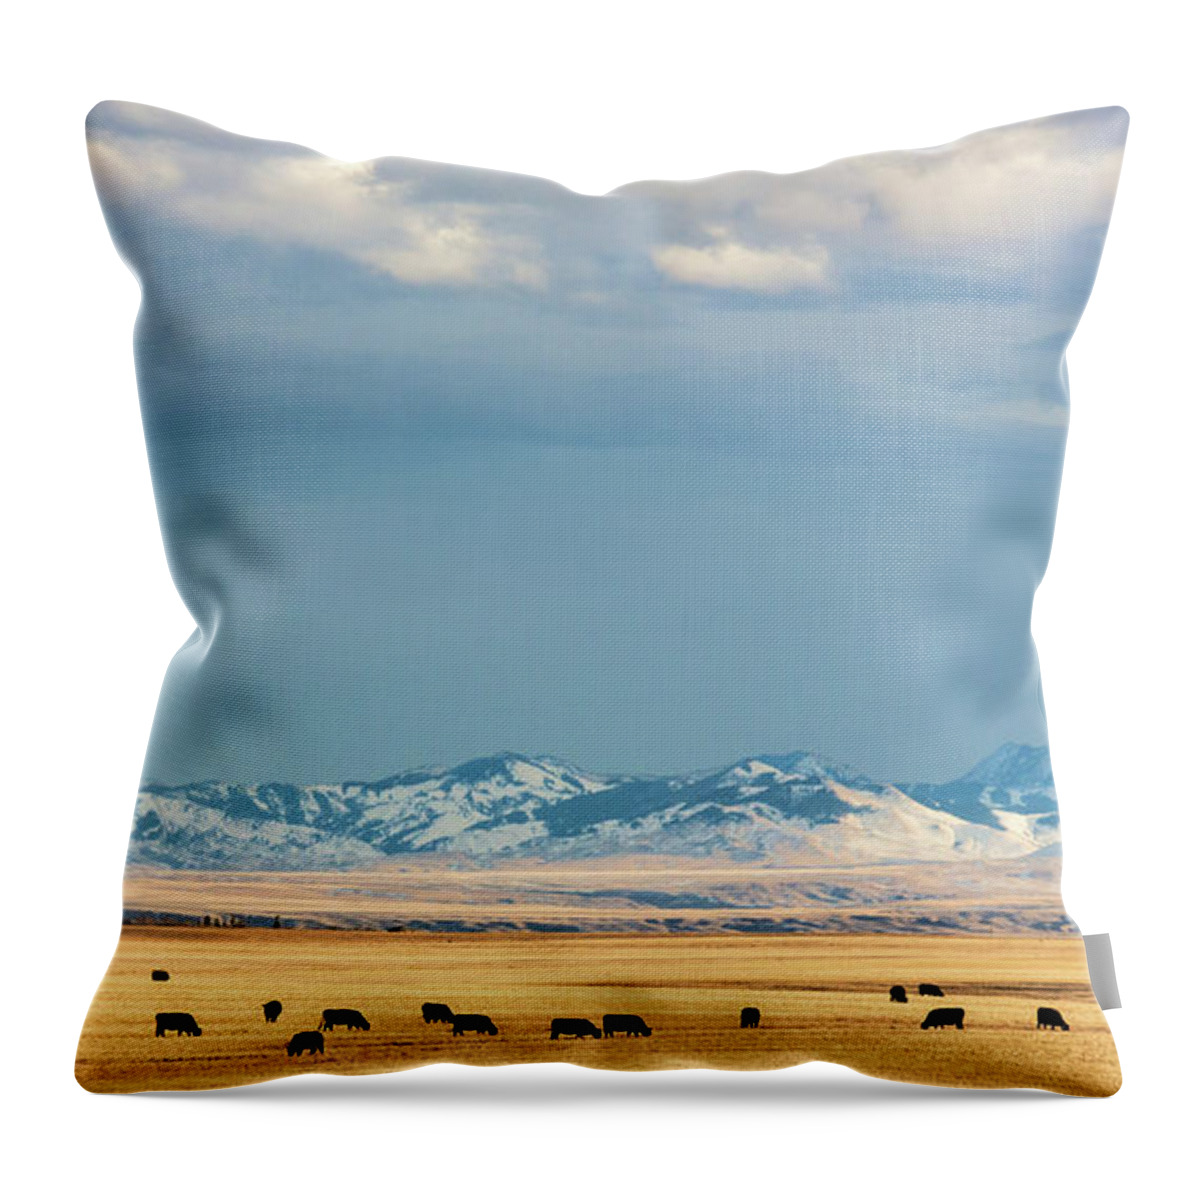 Cattle Throw Pillow featuring the photograph Grazing Near Highwood by Todd Klassy